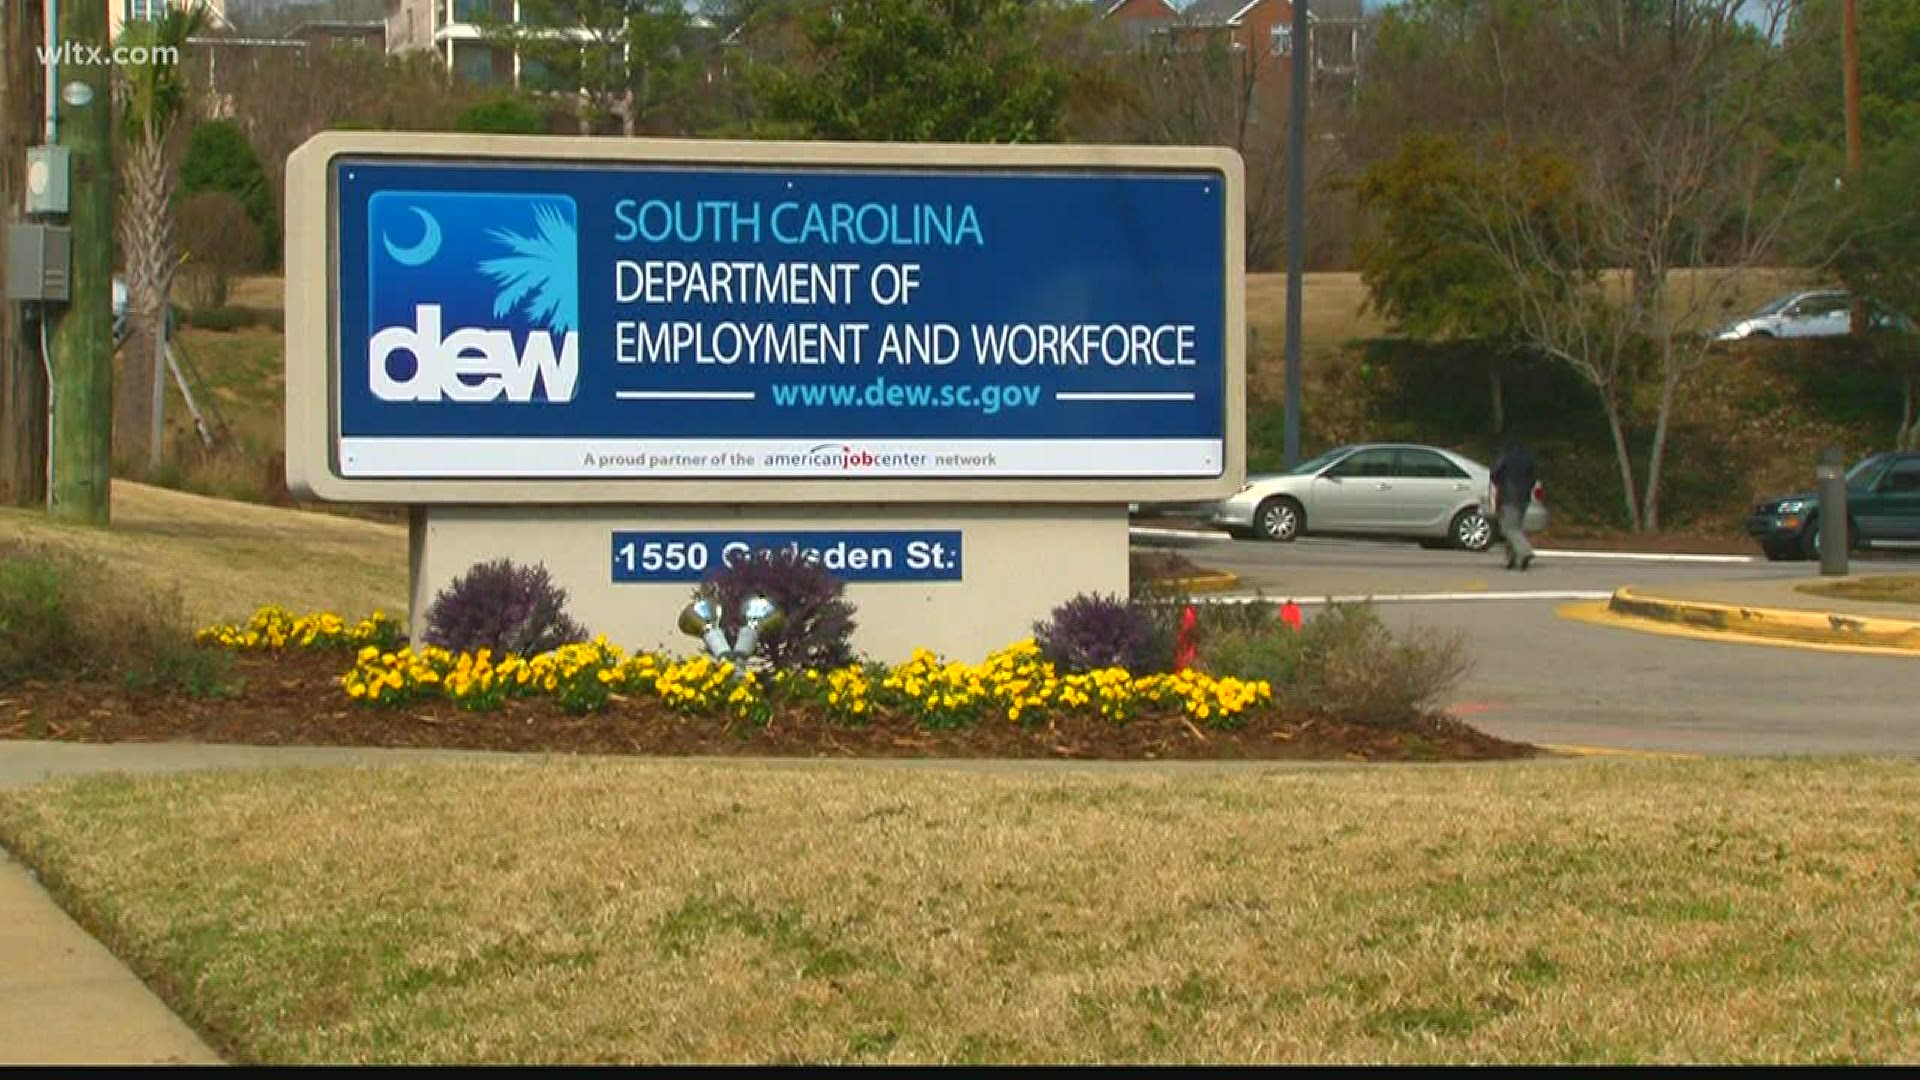 Employees furloughed due to COVID-19 will be allowed to apply for unemployment